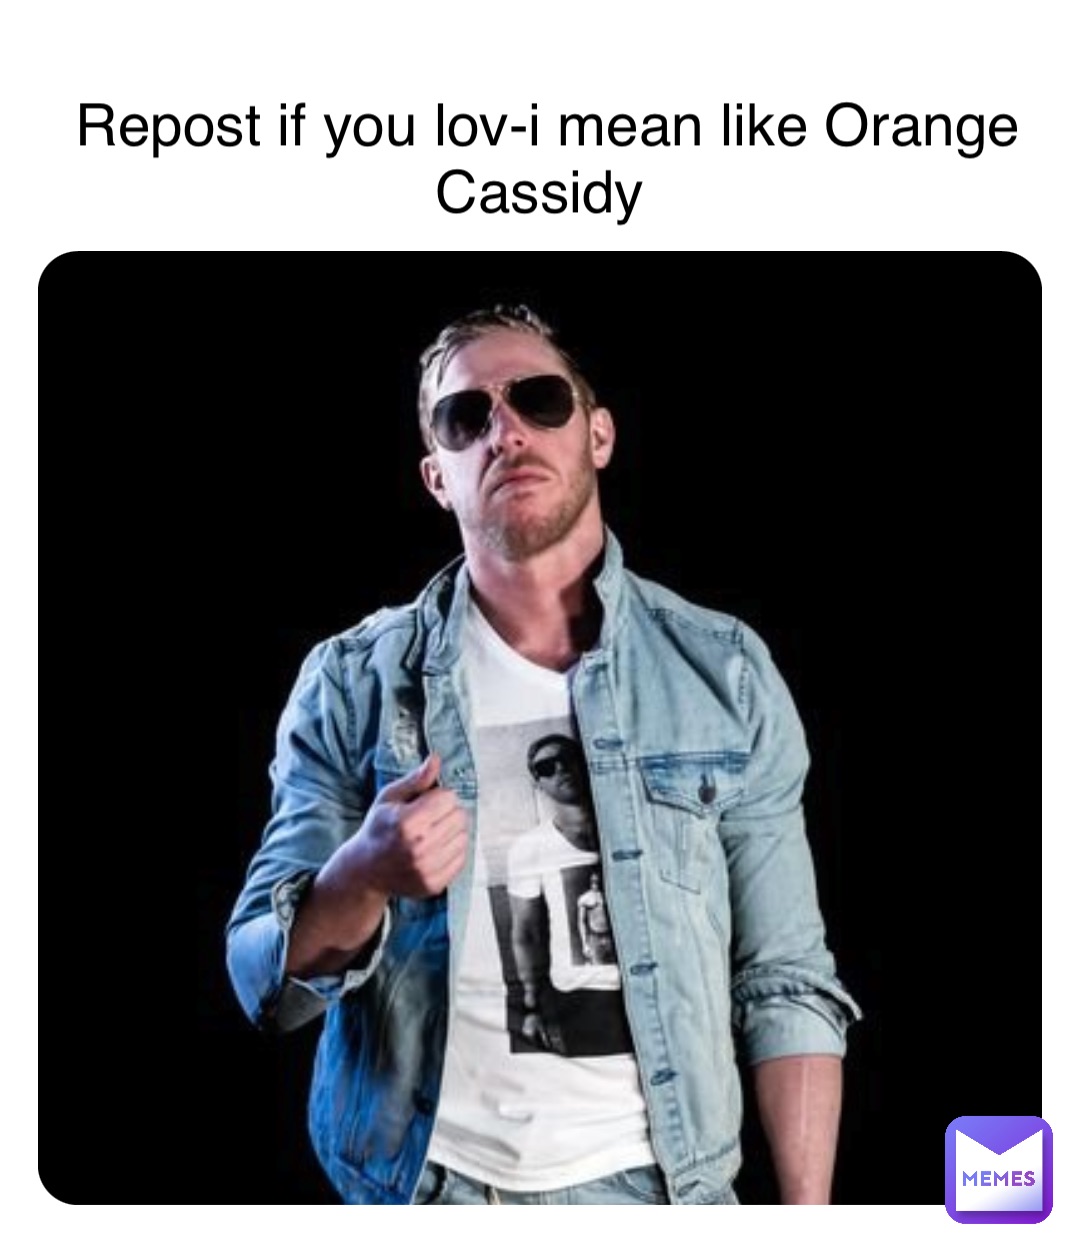 Double tap to edit Repost if you lov-i mean like Orange Cassidy